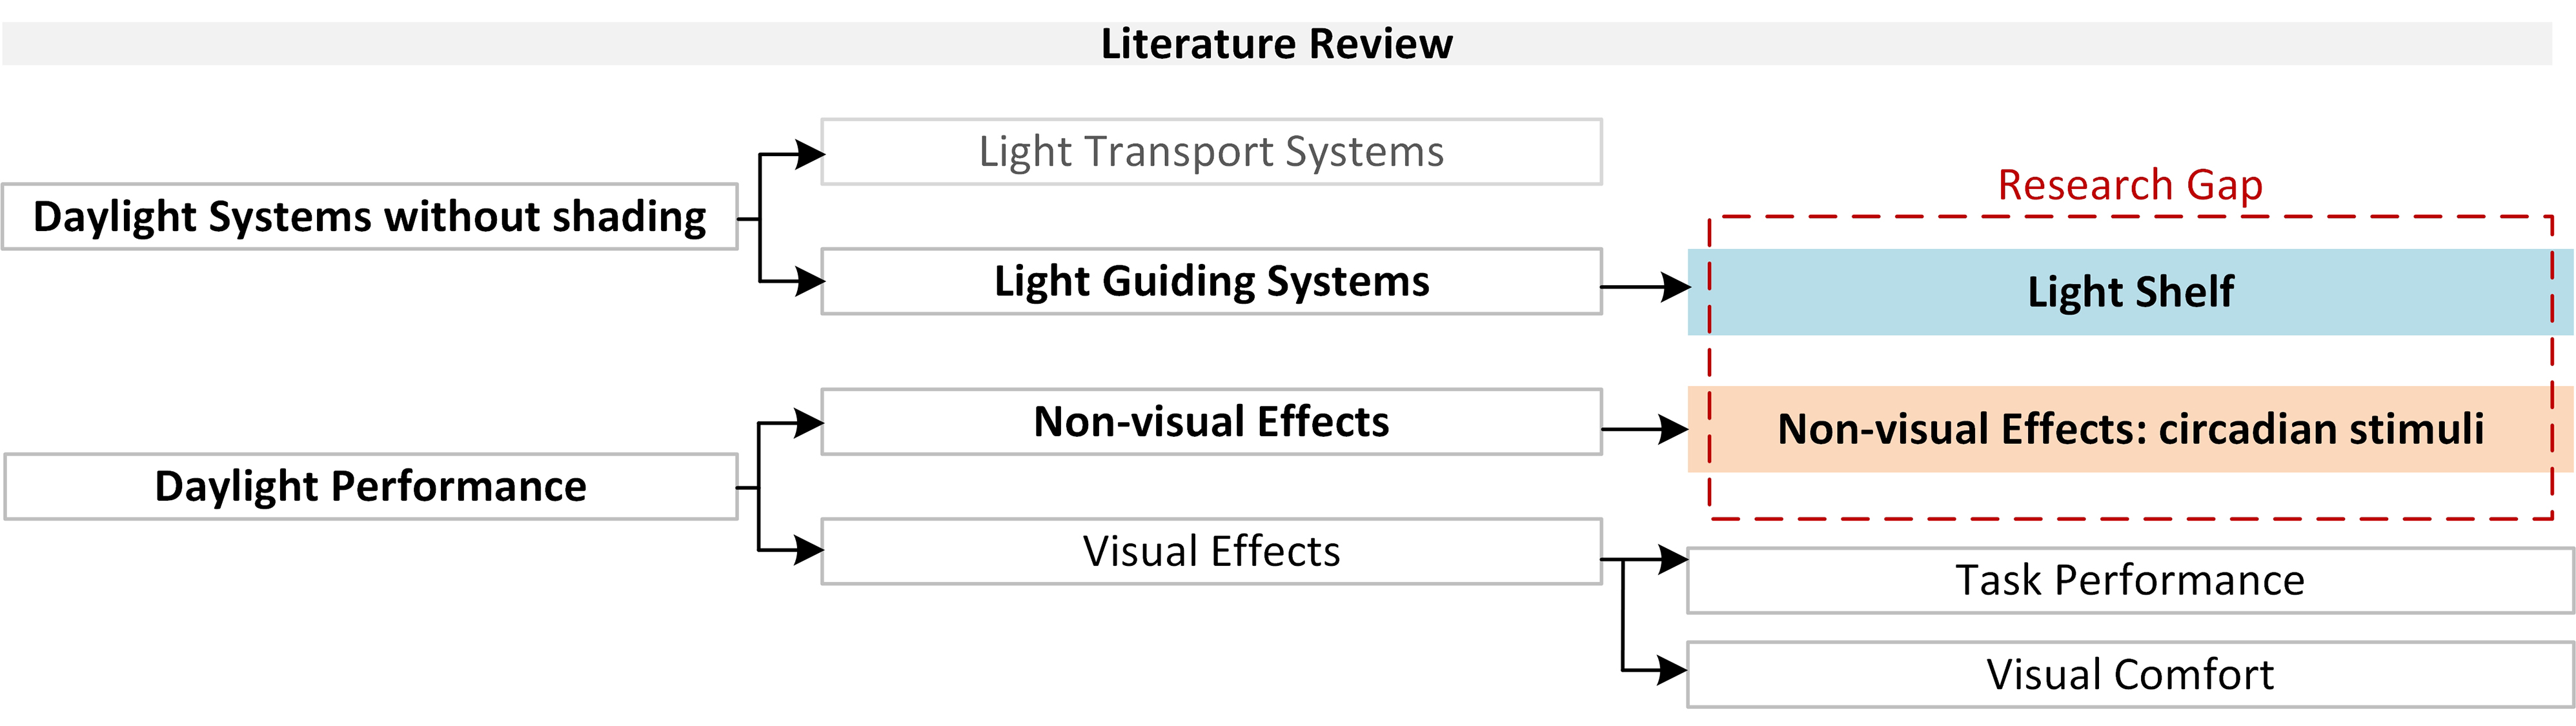 The literature review process- by authors.